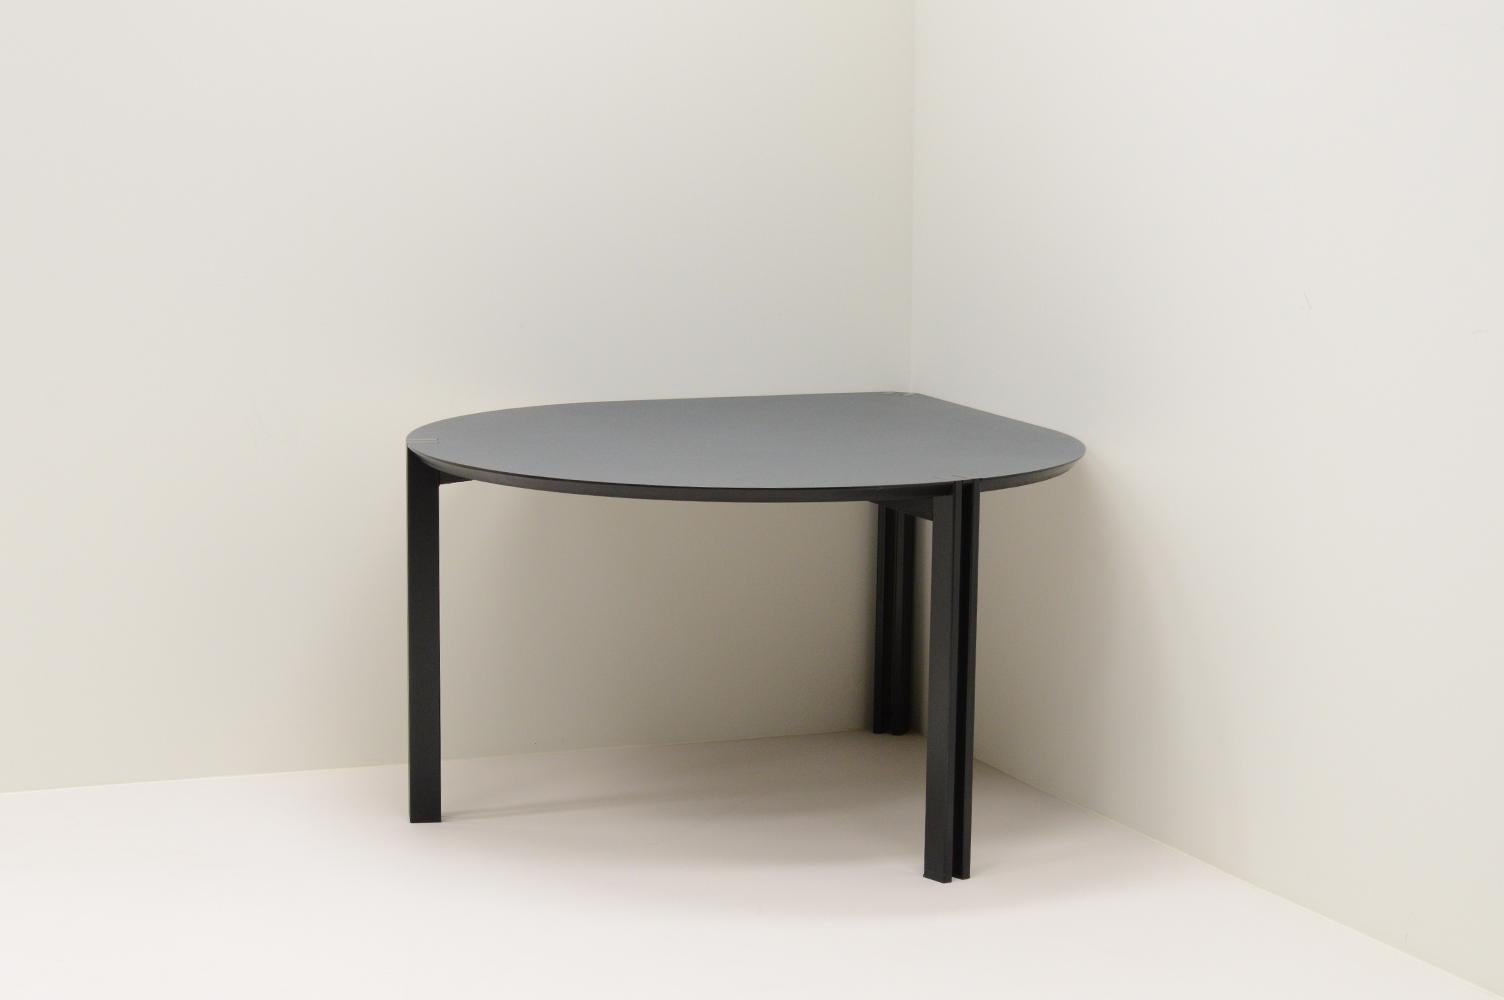 Dutch Drop post-modern dining table by Harvink, 1980s The Netherlands.  For Sale